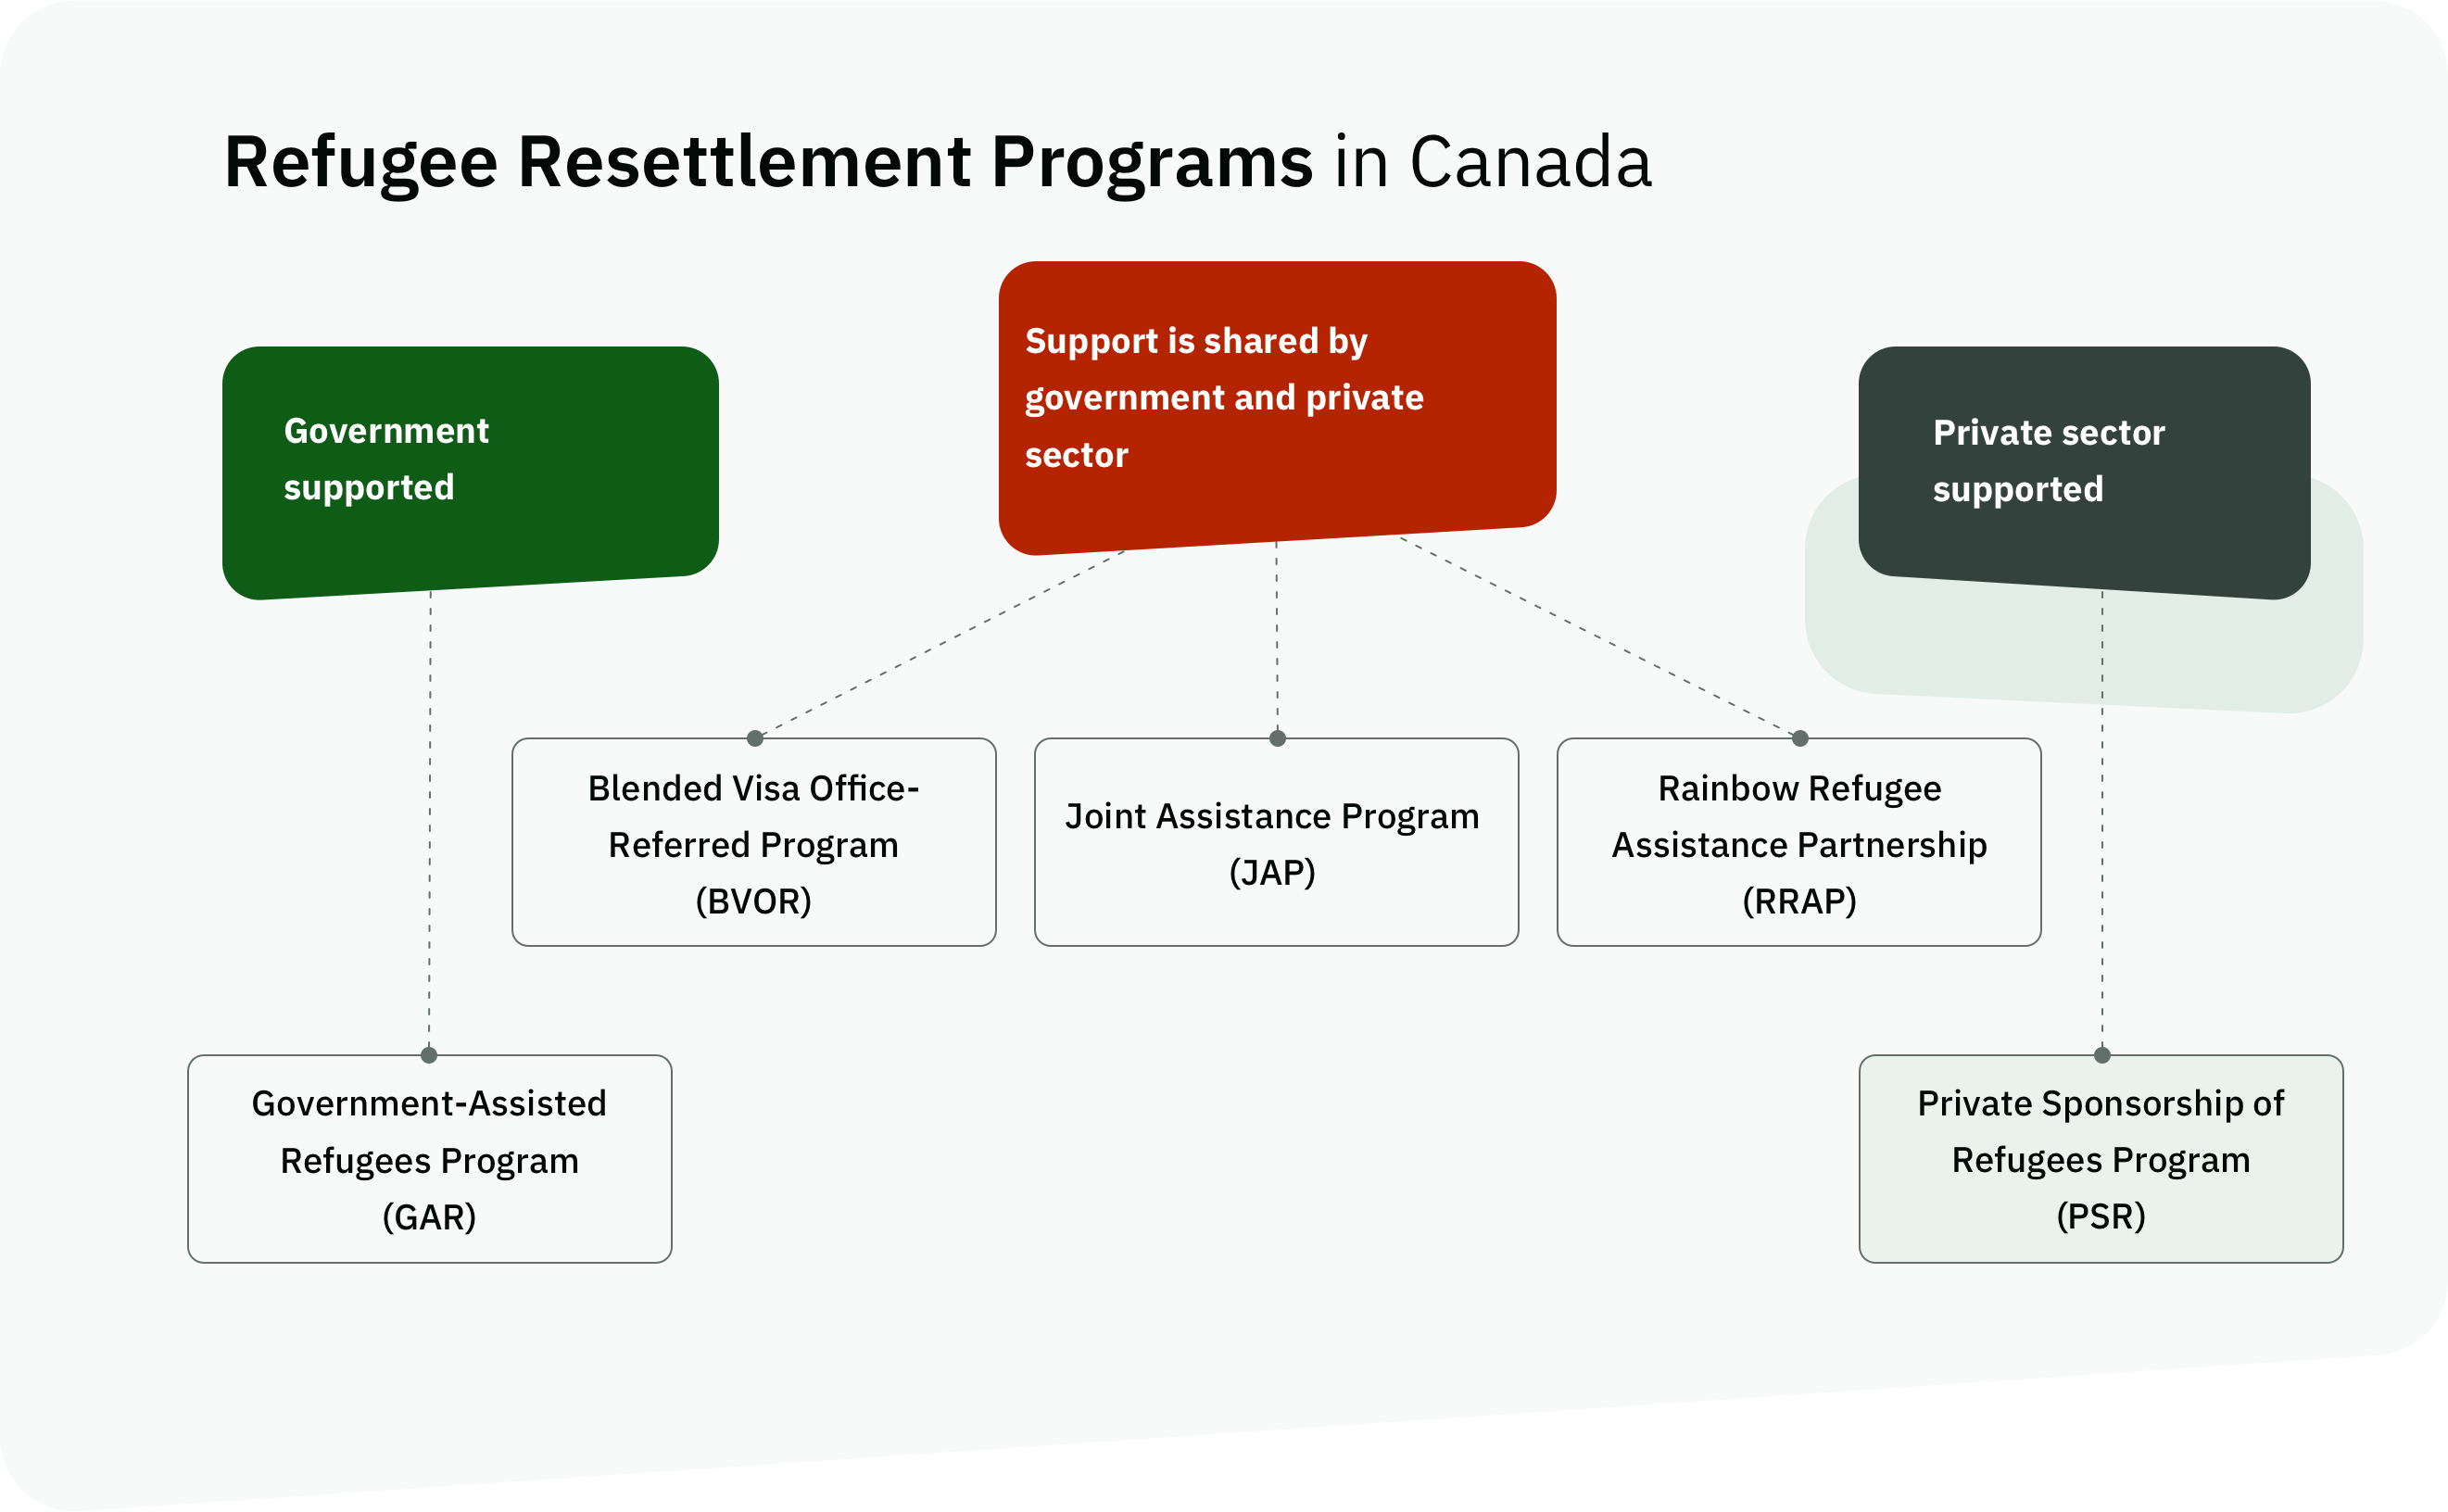 Diagram summarizing the different refugee resettlement programs in Canada